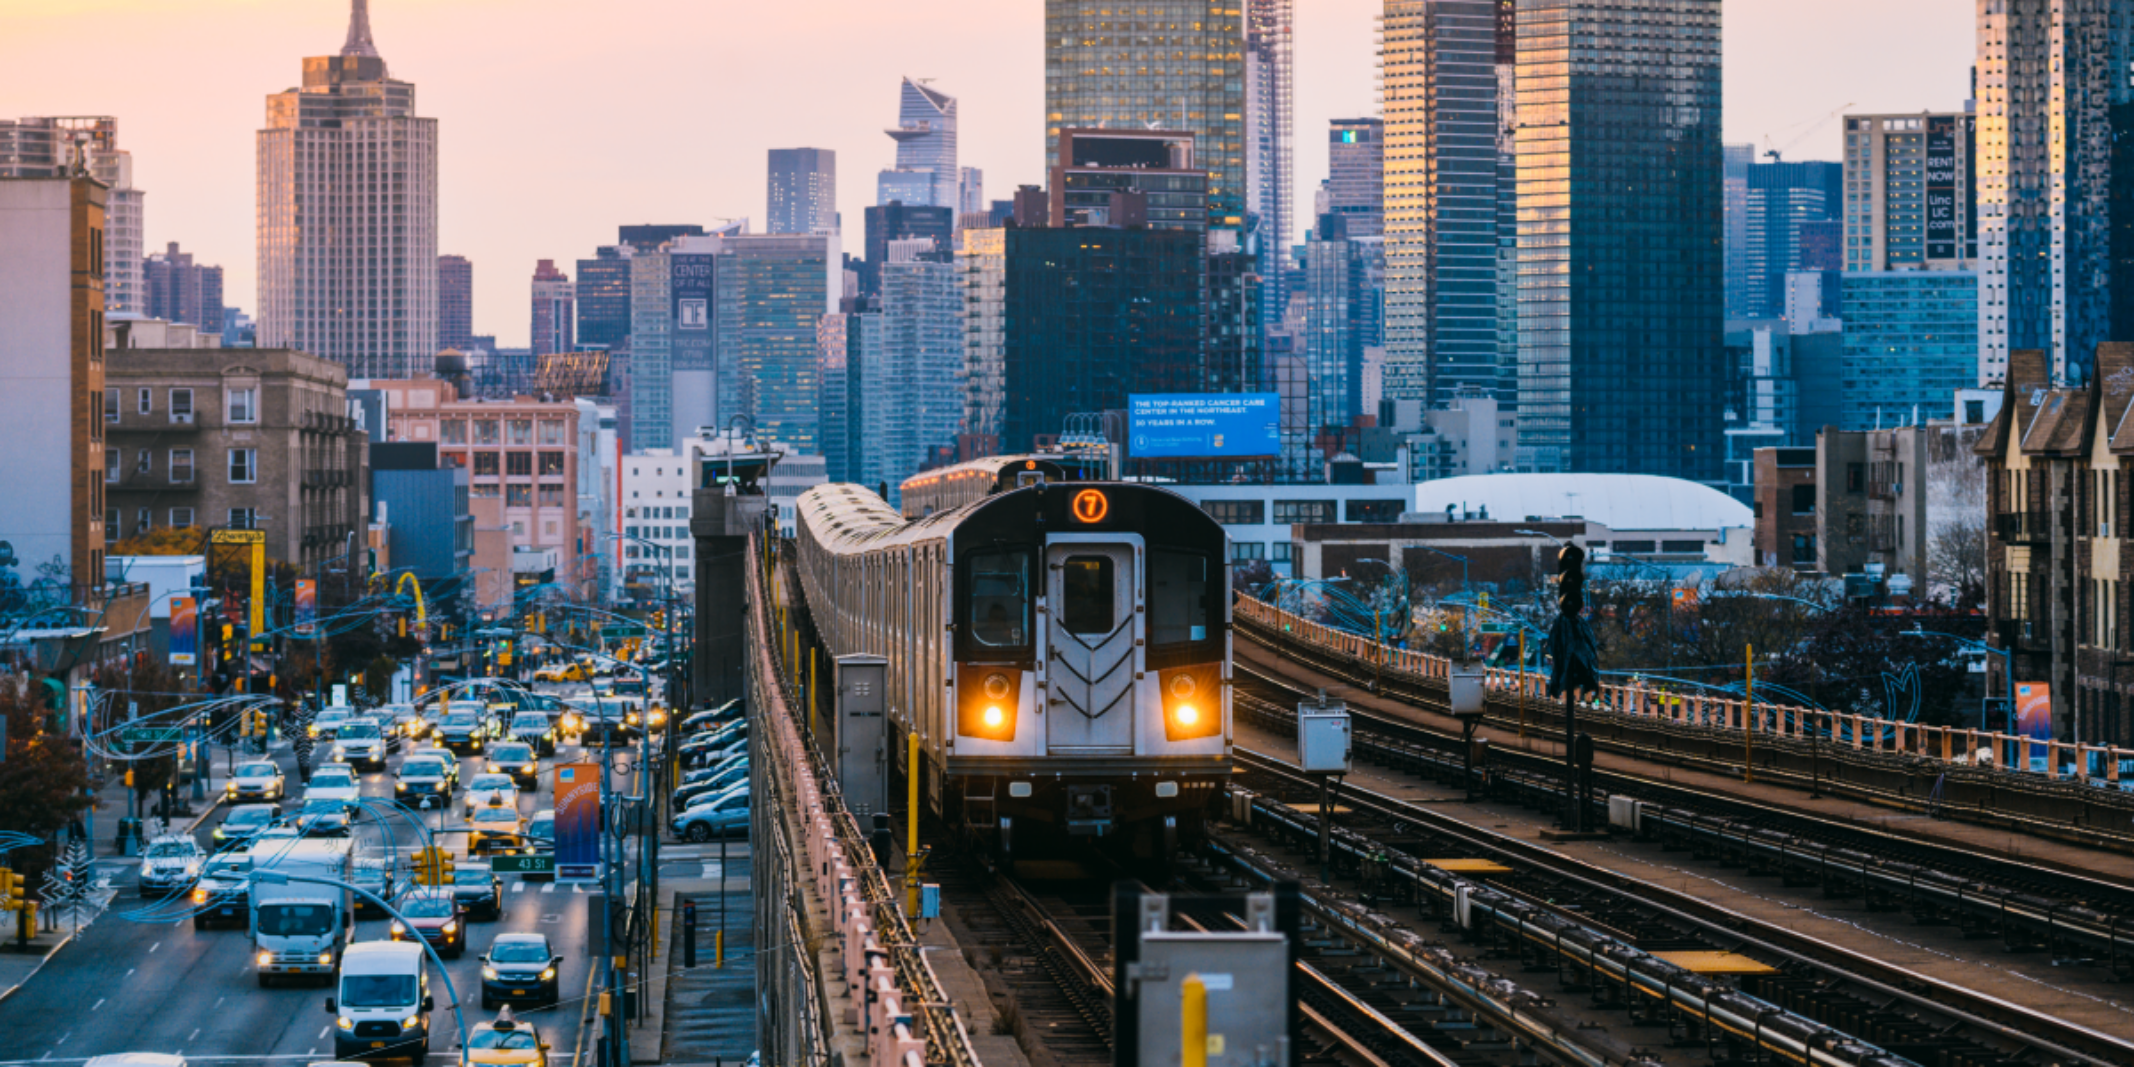 A subway train moves toward the photographer on an elevated subway line with a background of an urban landscape of highrises, and a road full of car traffic below and parallel to the subway line on the left.